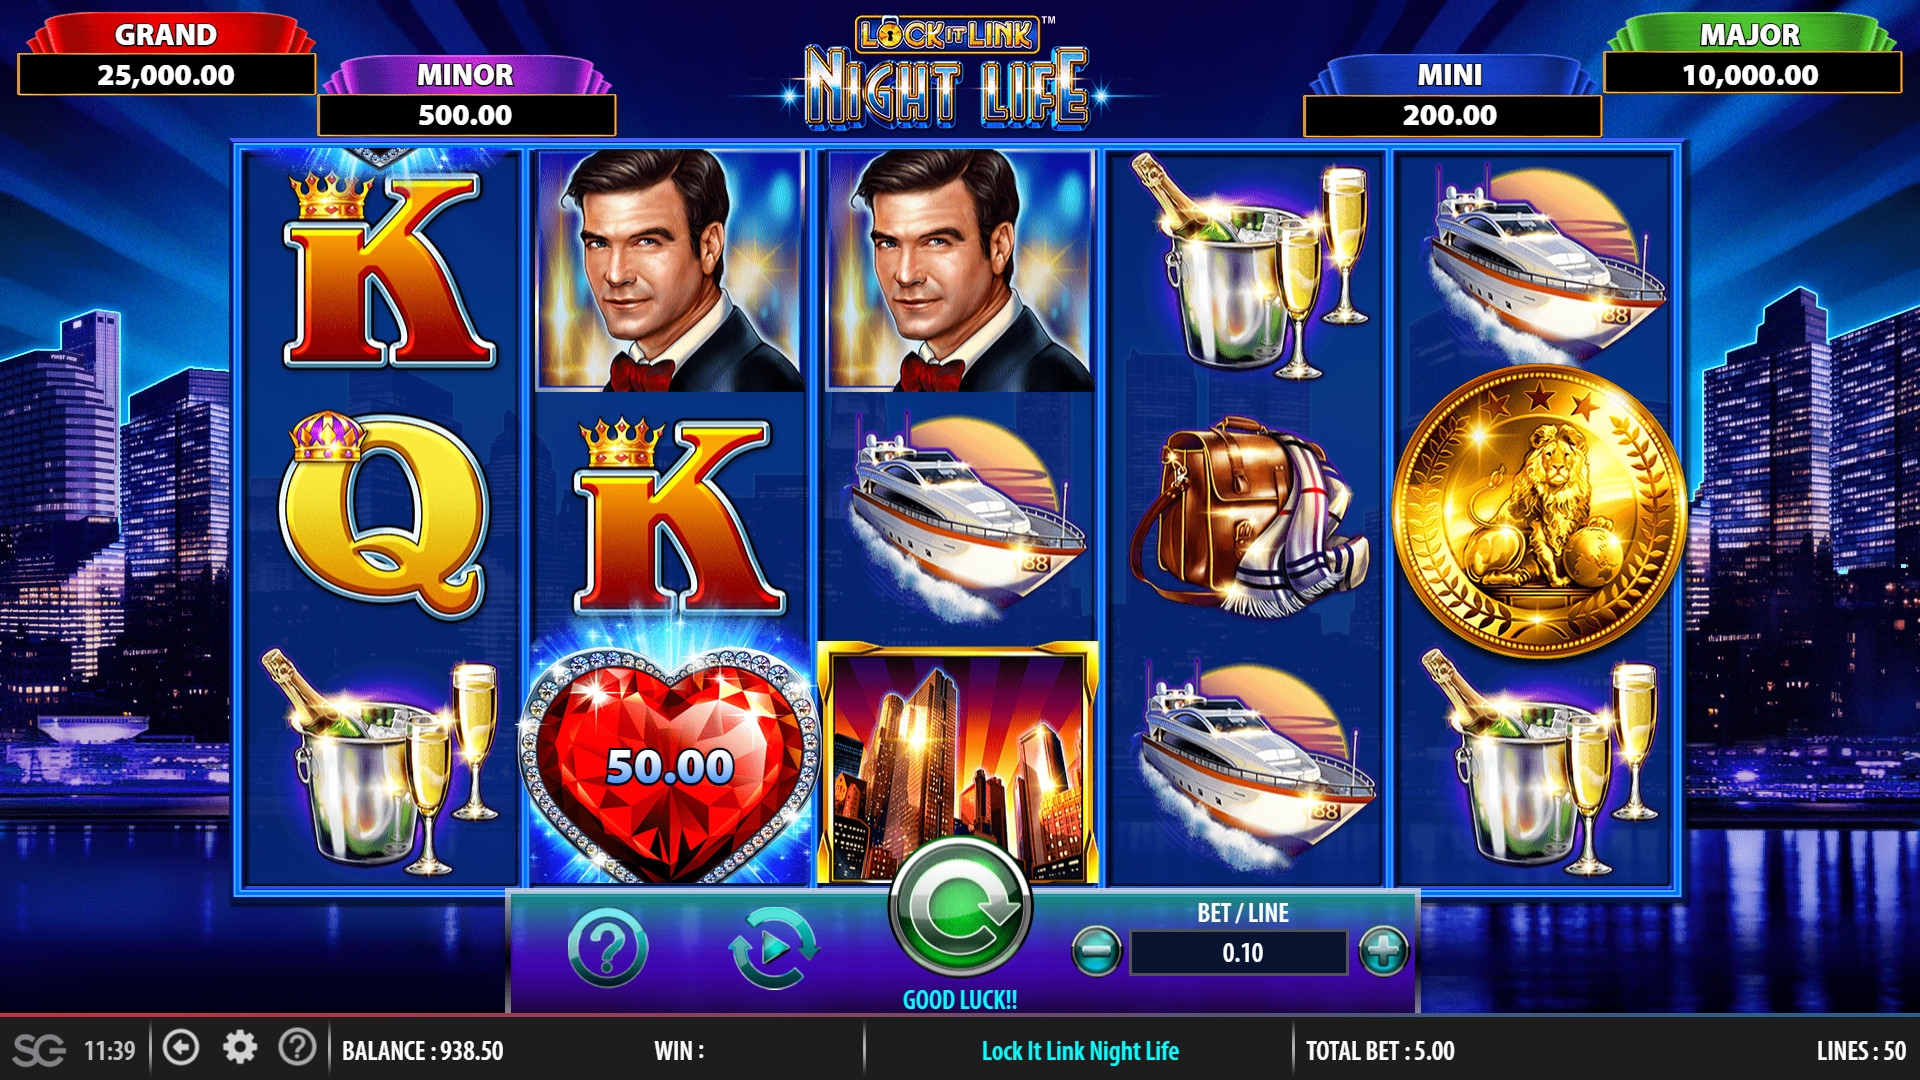 Lock It Link - Night Life (Lock It Link – Night Life) from category Slots